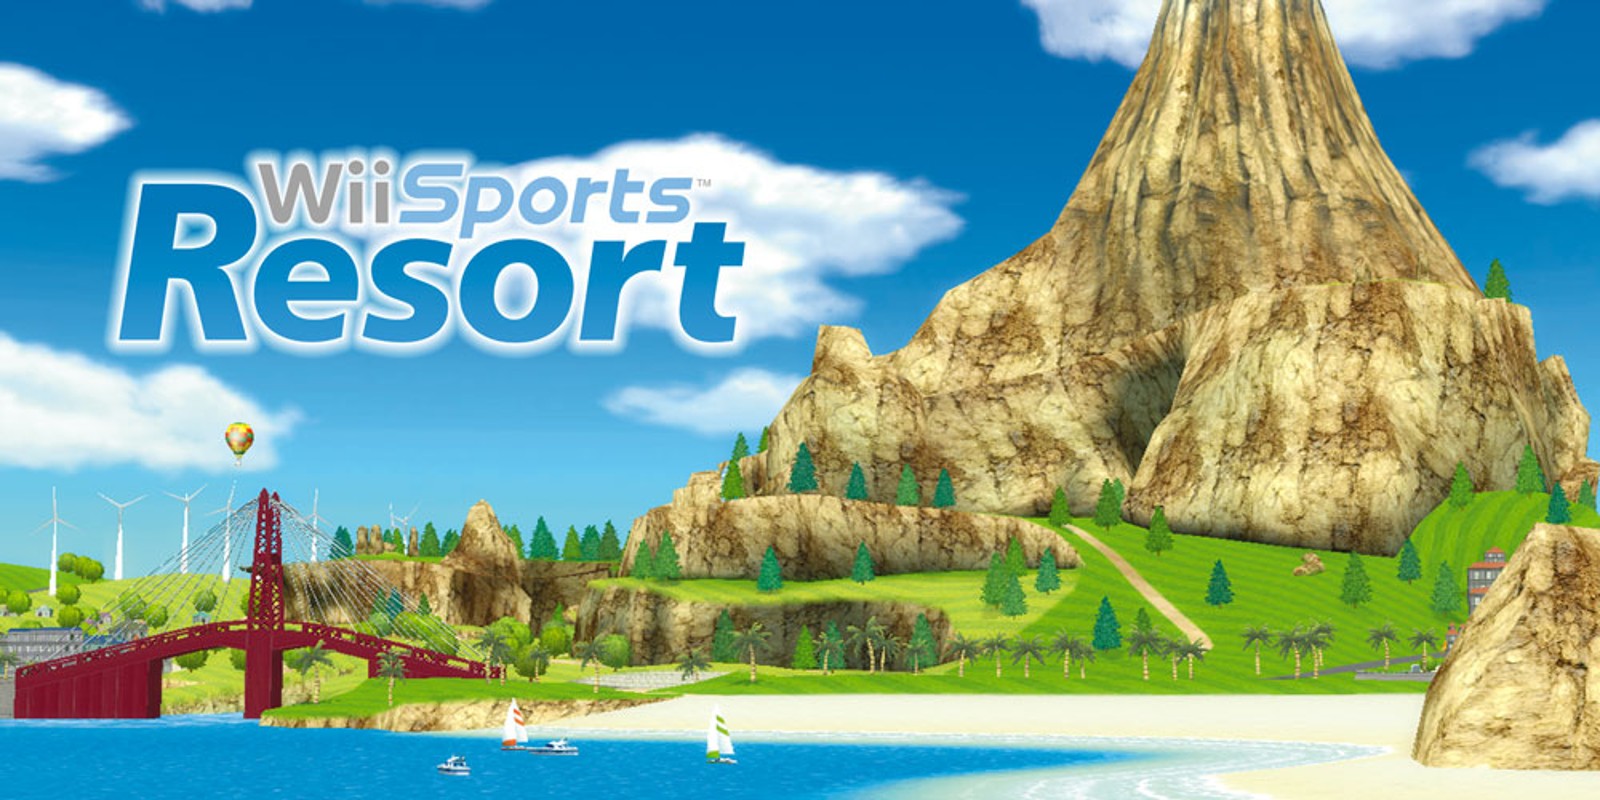 Where Can I Buy Wii Sports Resort 